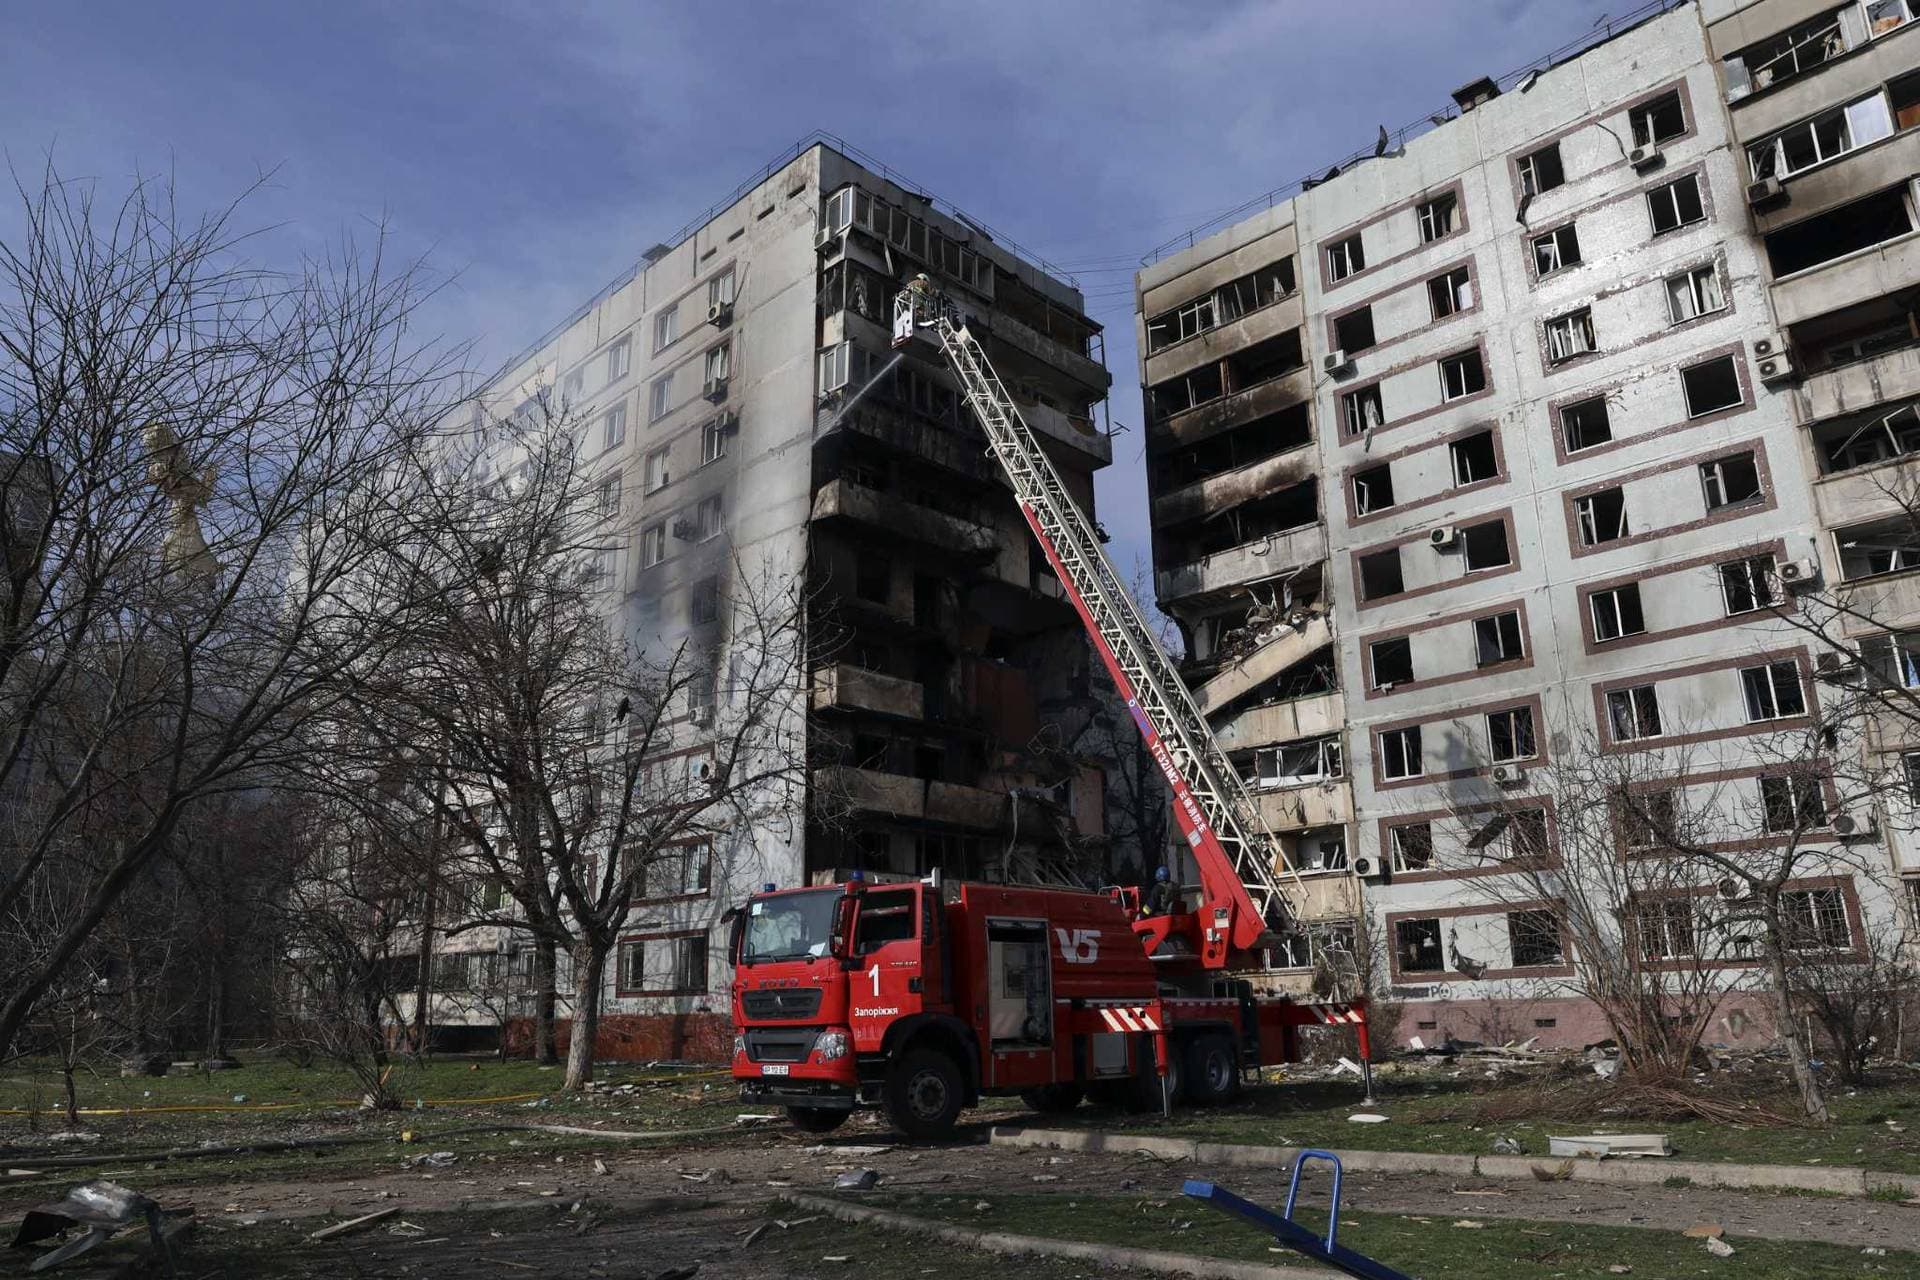 A firefighter puts out a fire after a Russian missile hit a residential multi-story building in southeastern city of Zaporizhzhia